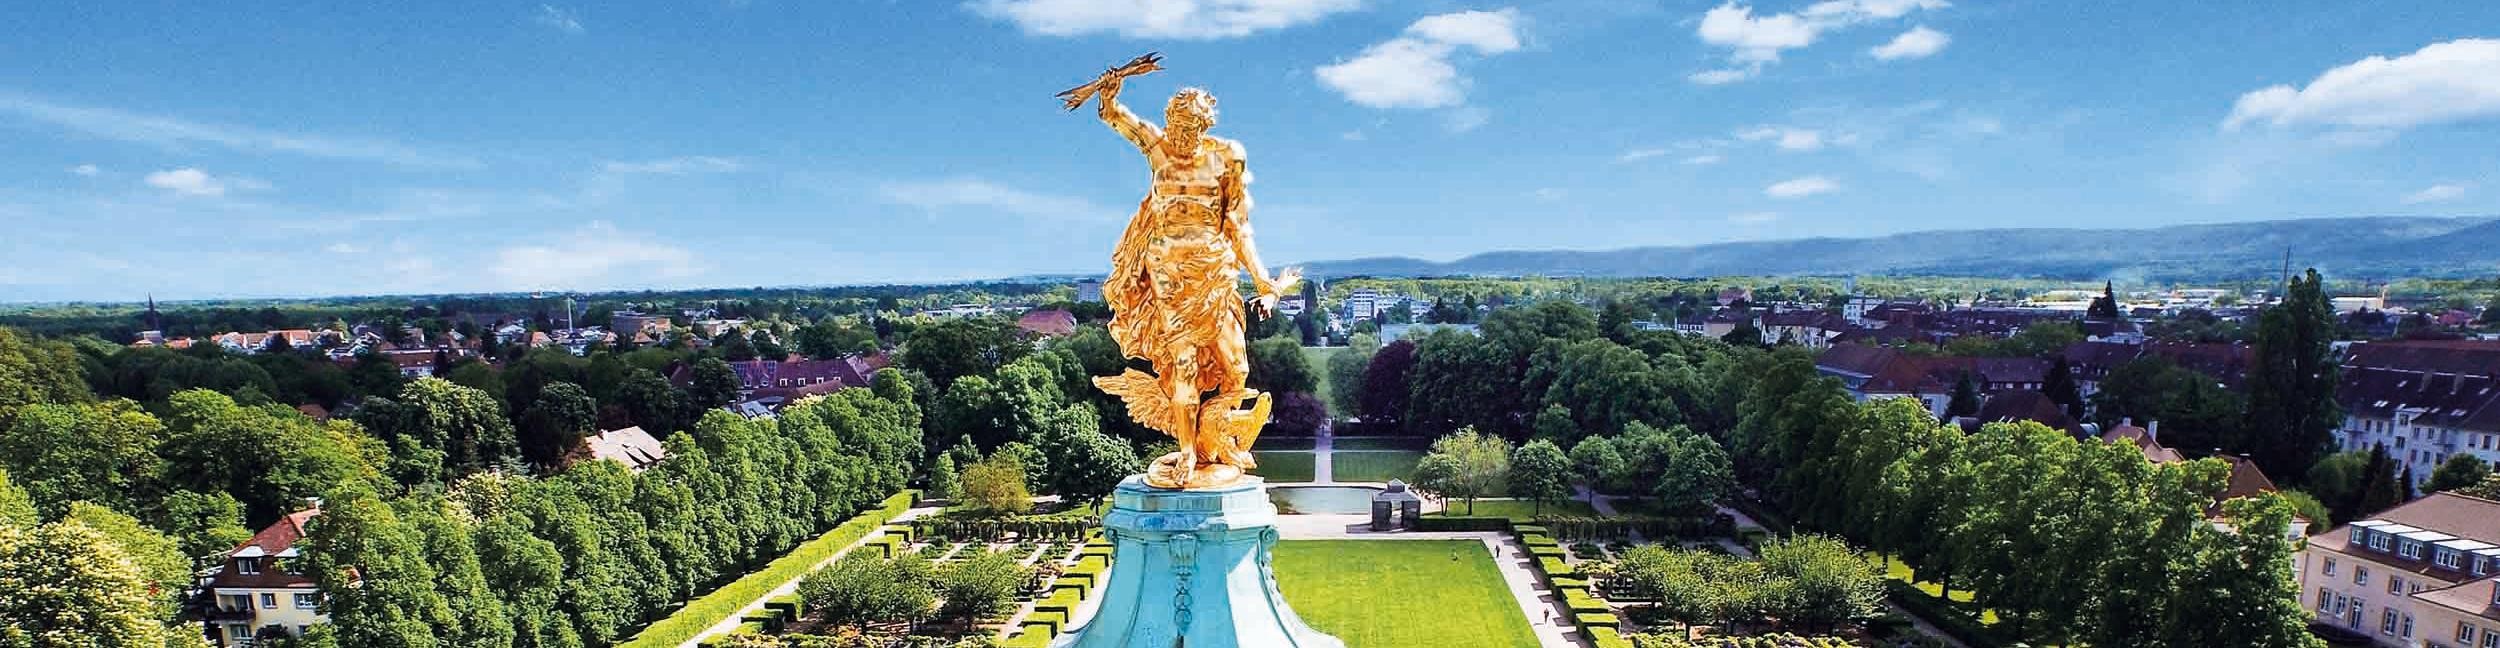 Golden man at the castle